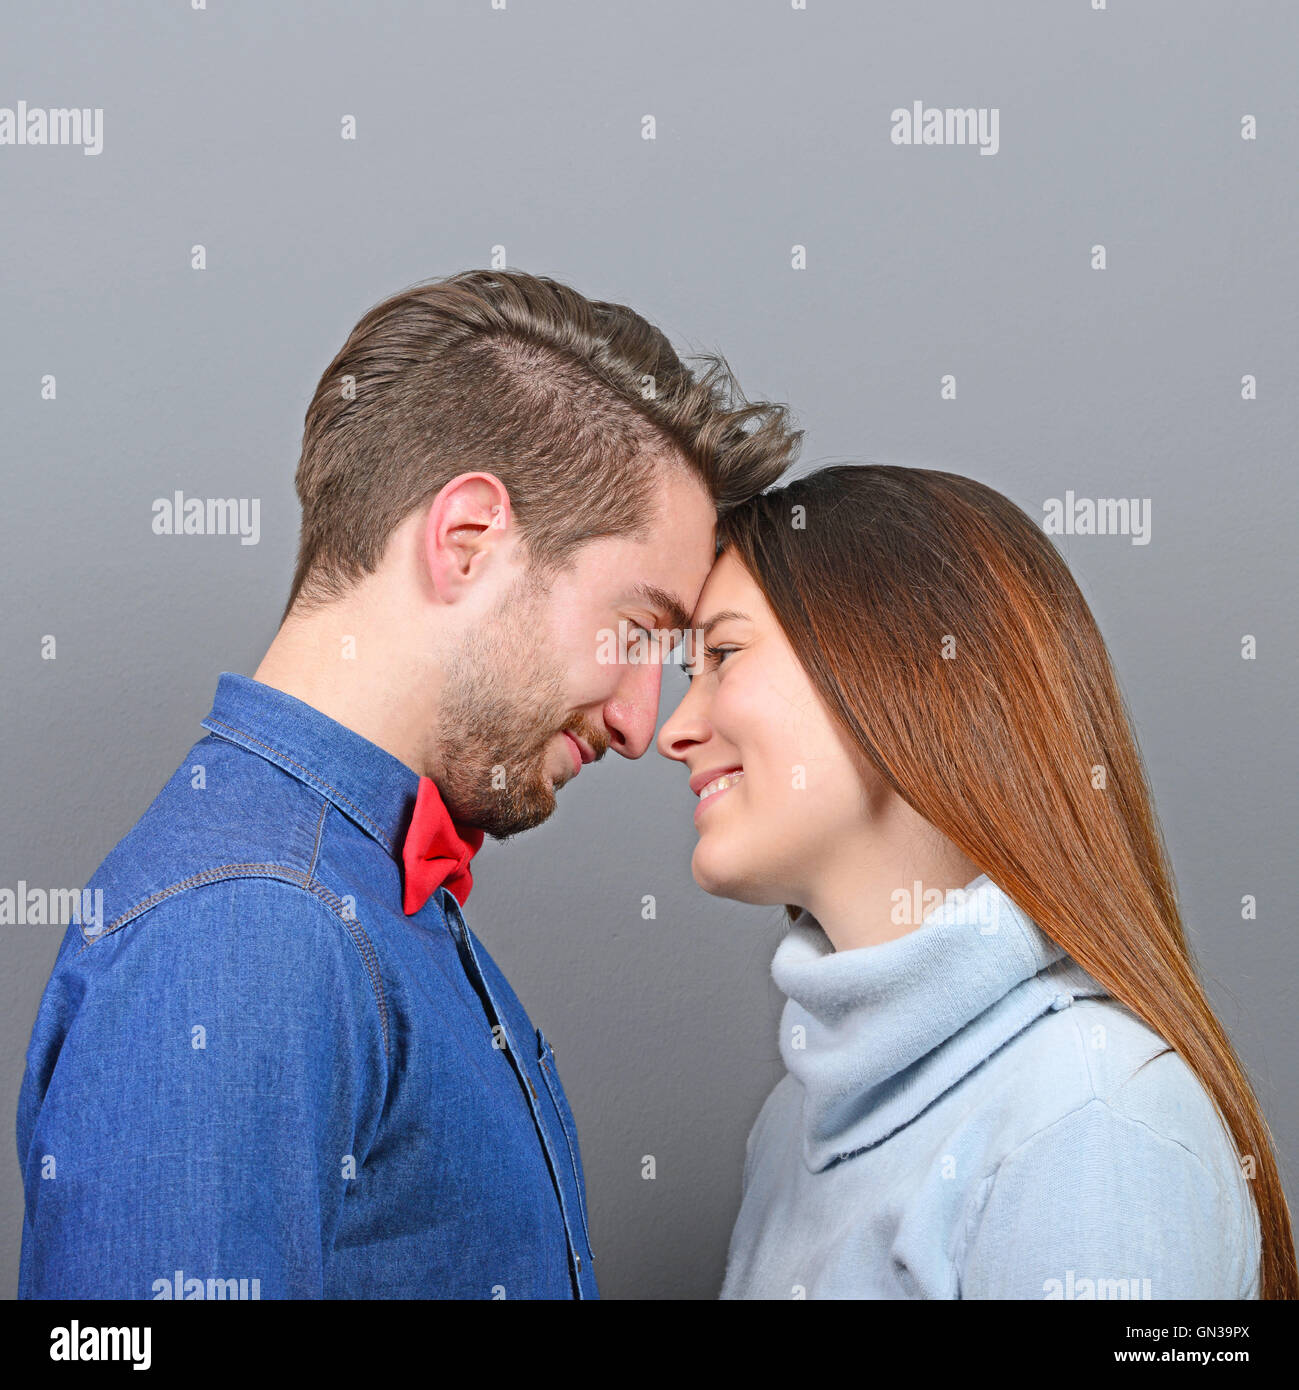 Happy couple in love looking deeply into each others eyes against gray background Stock Photo